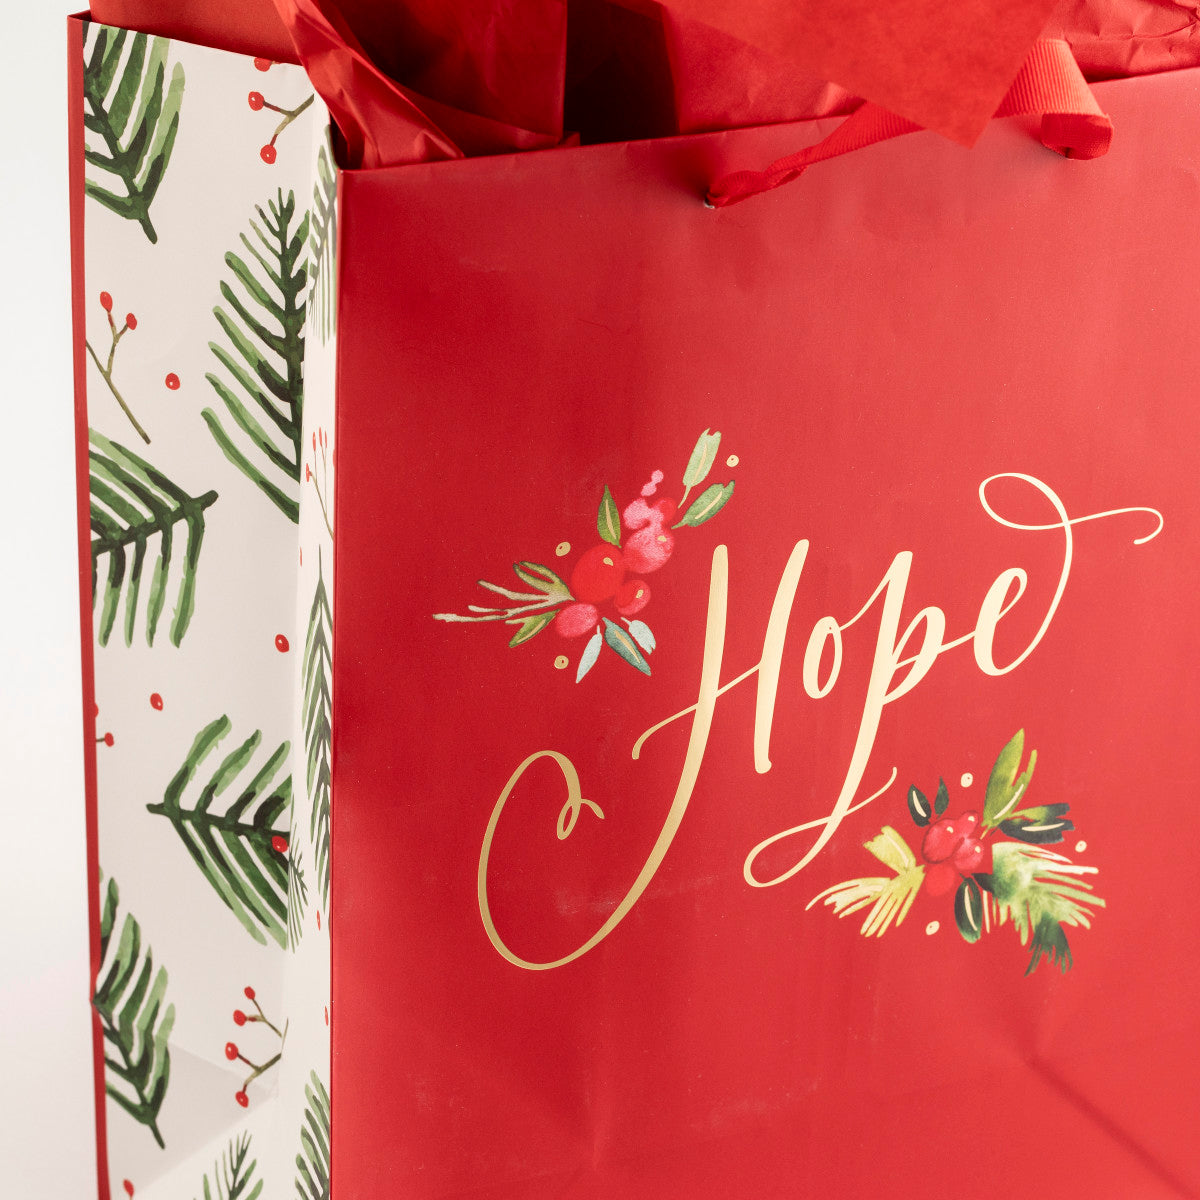 Yay You - Large Gift Bag with Tissue